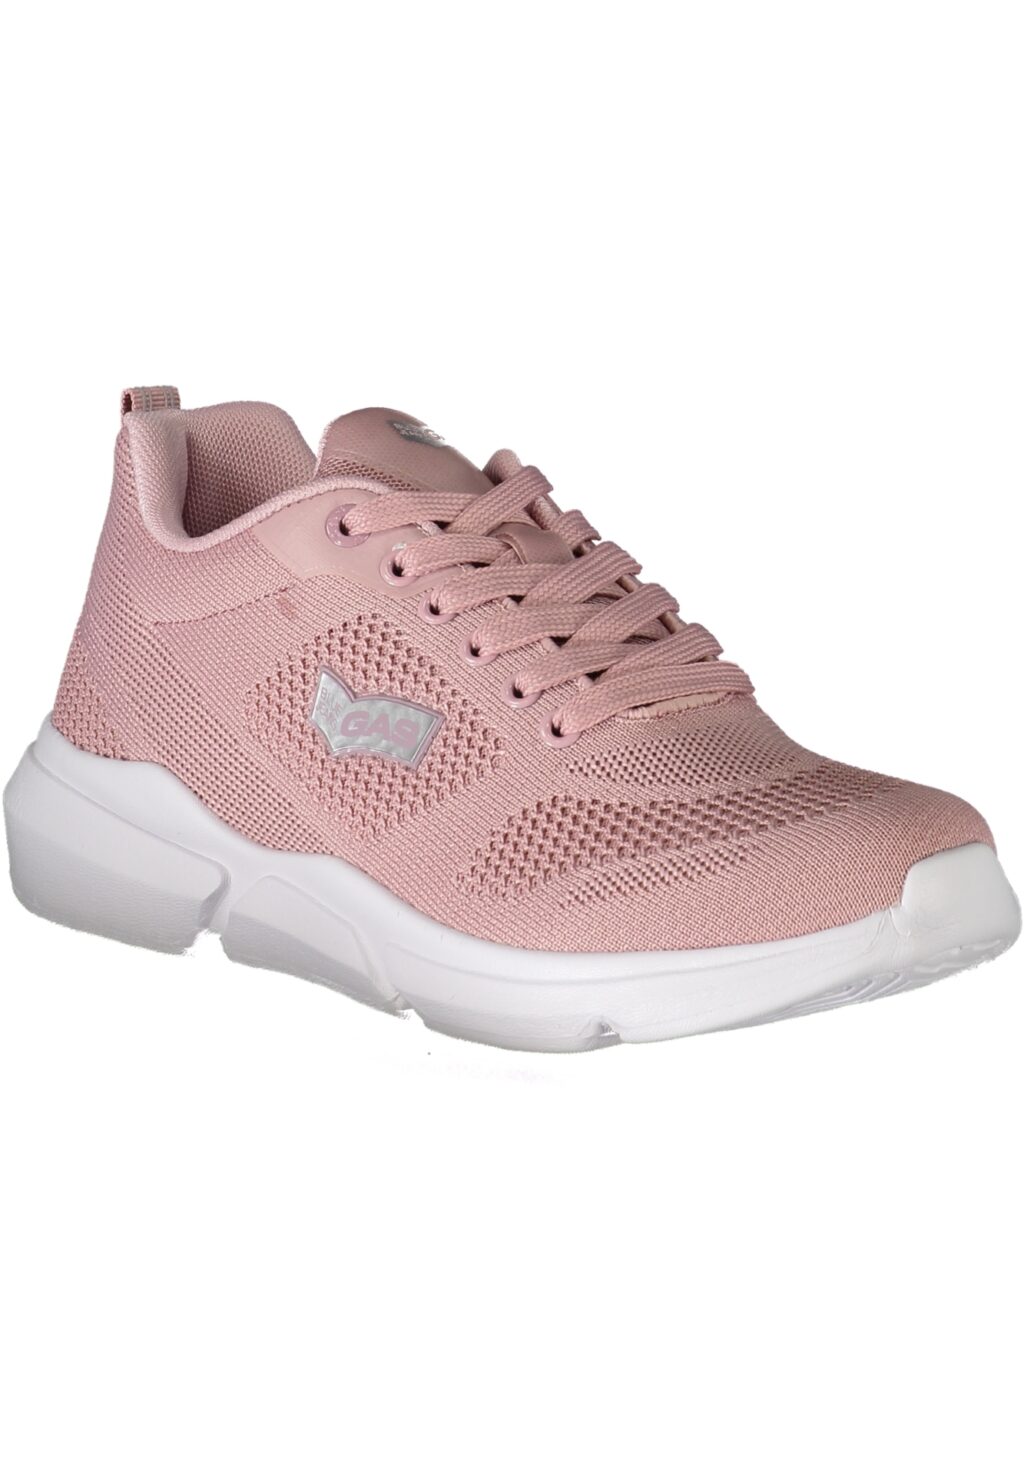 GAS PINK WOMEN'S SPORTS SHOES GAW417500_RS0044